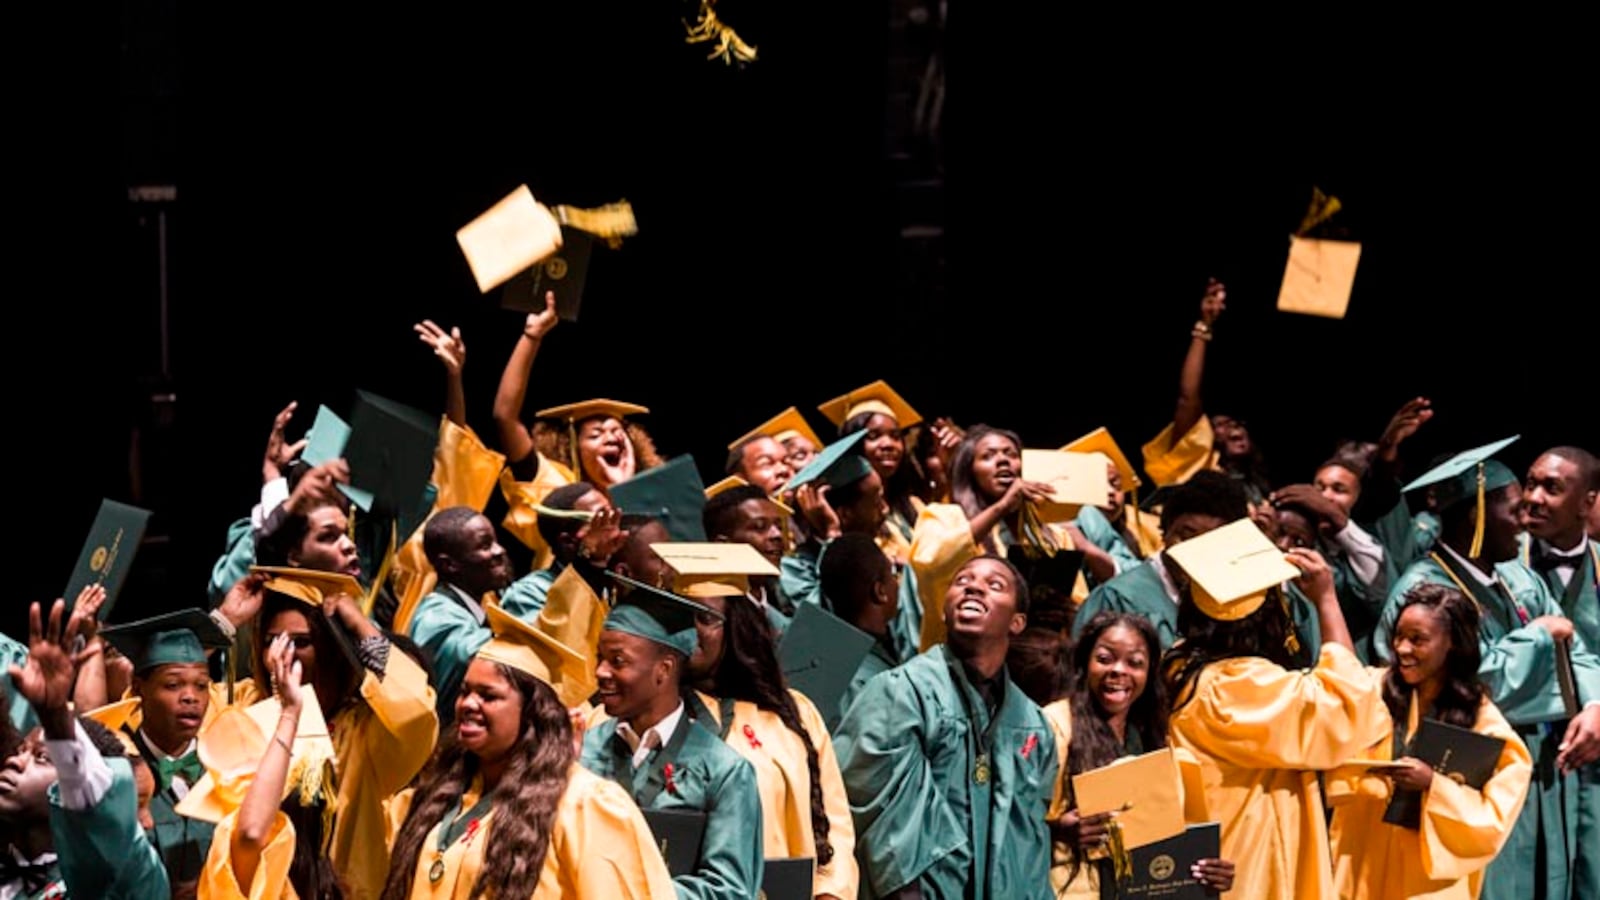 Booker T. Washington High School seniors toss their graduation caps into the air  at the conclusion of their 2016 graduation ceremony at the Orpheum Theatre.